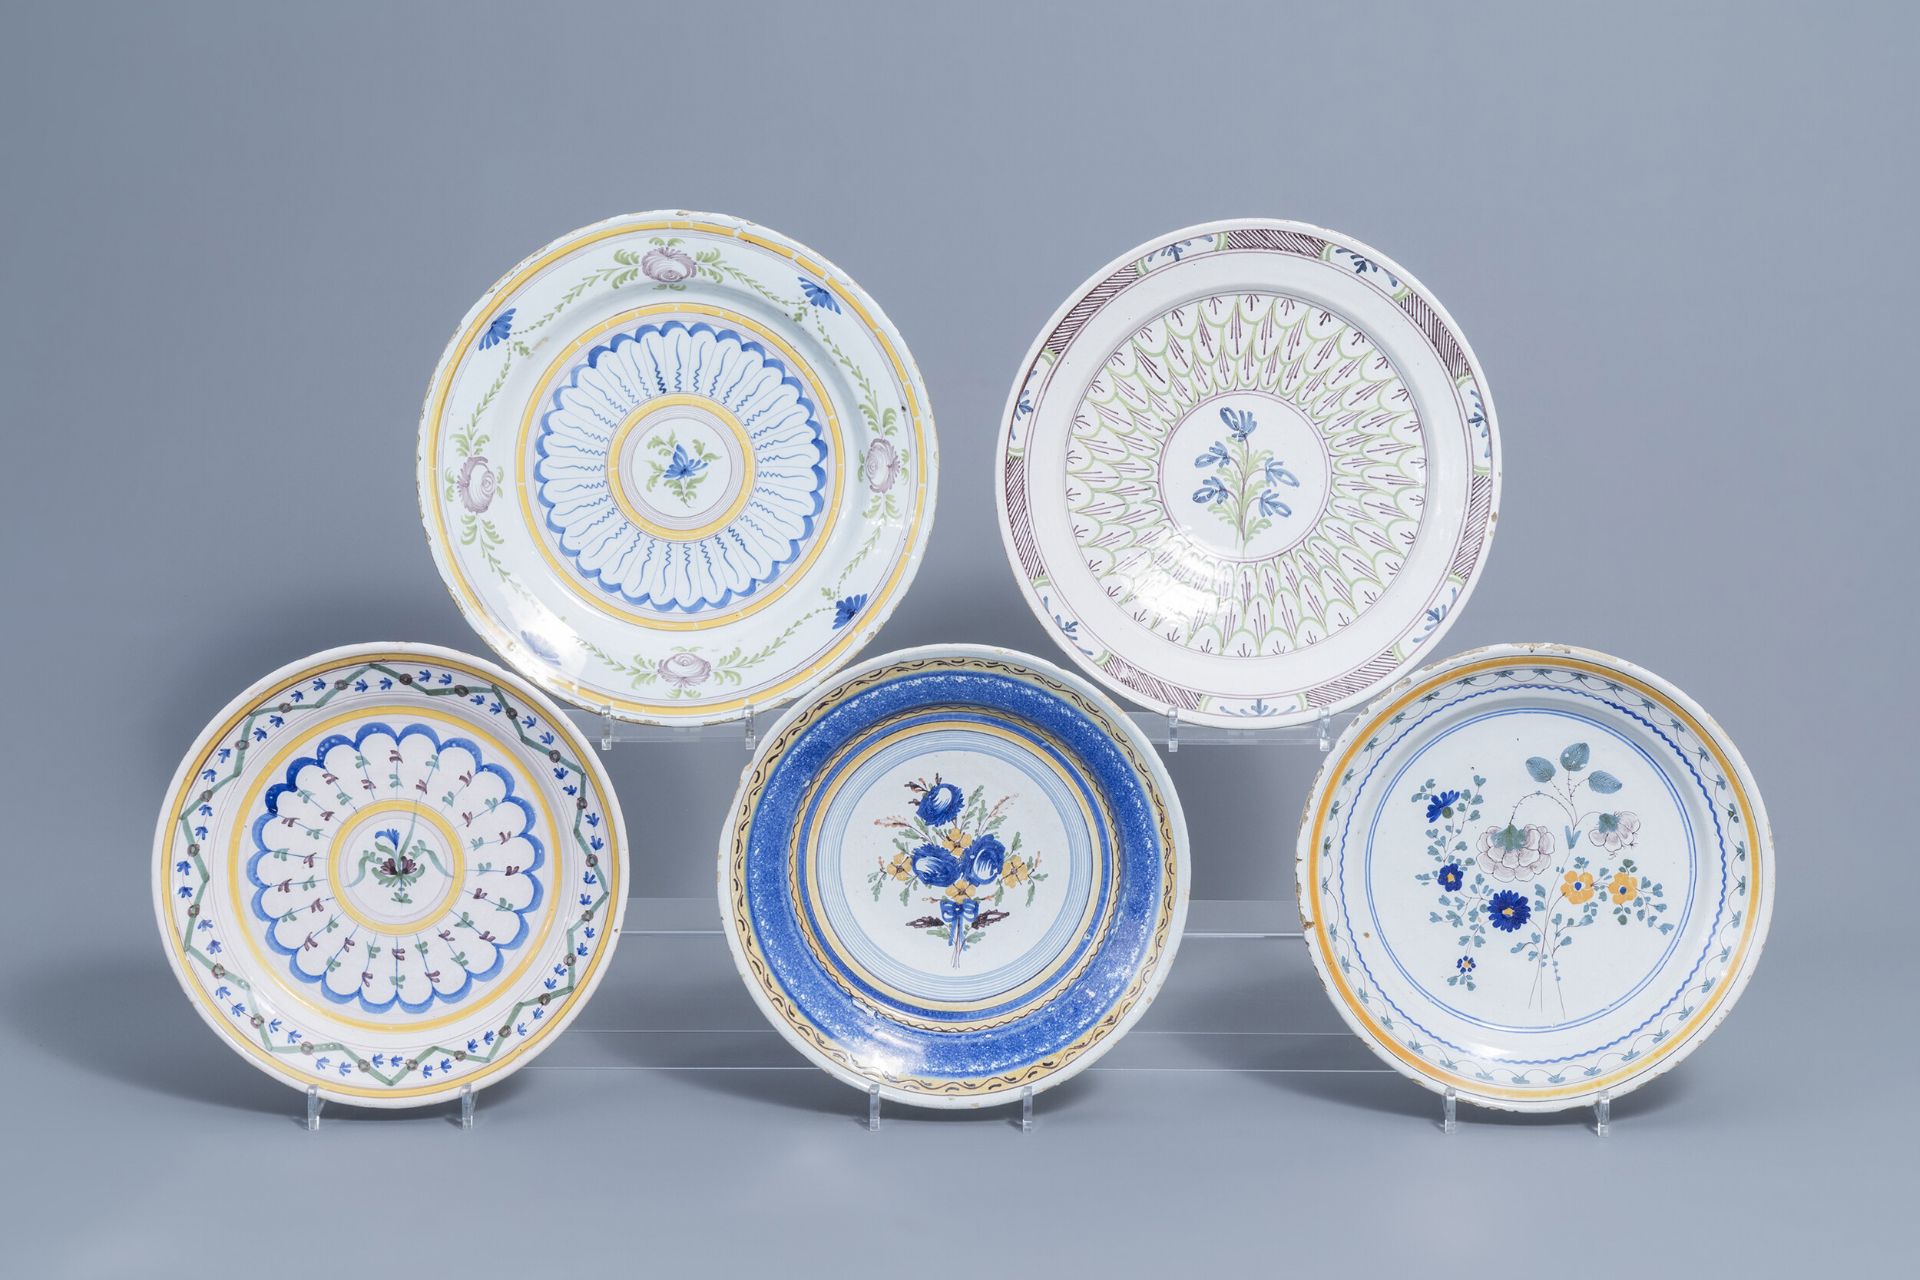 Five polychrome Brussels faience plates with floral design, 18th/19th C.